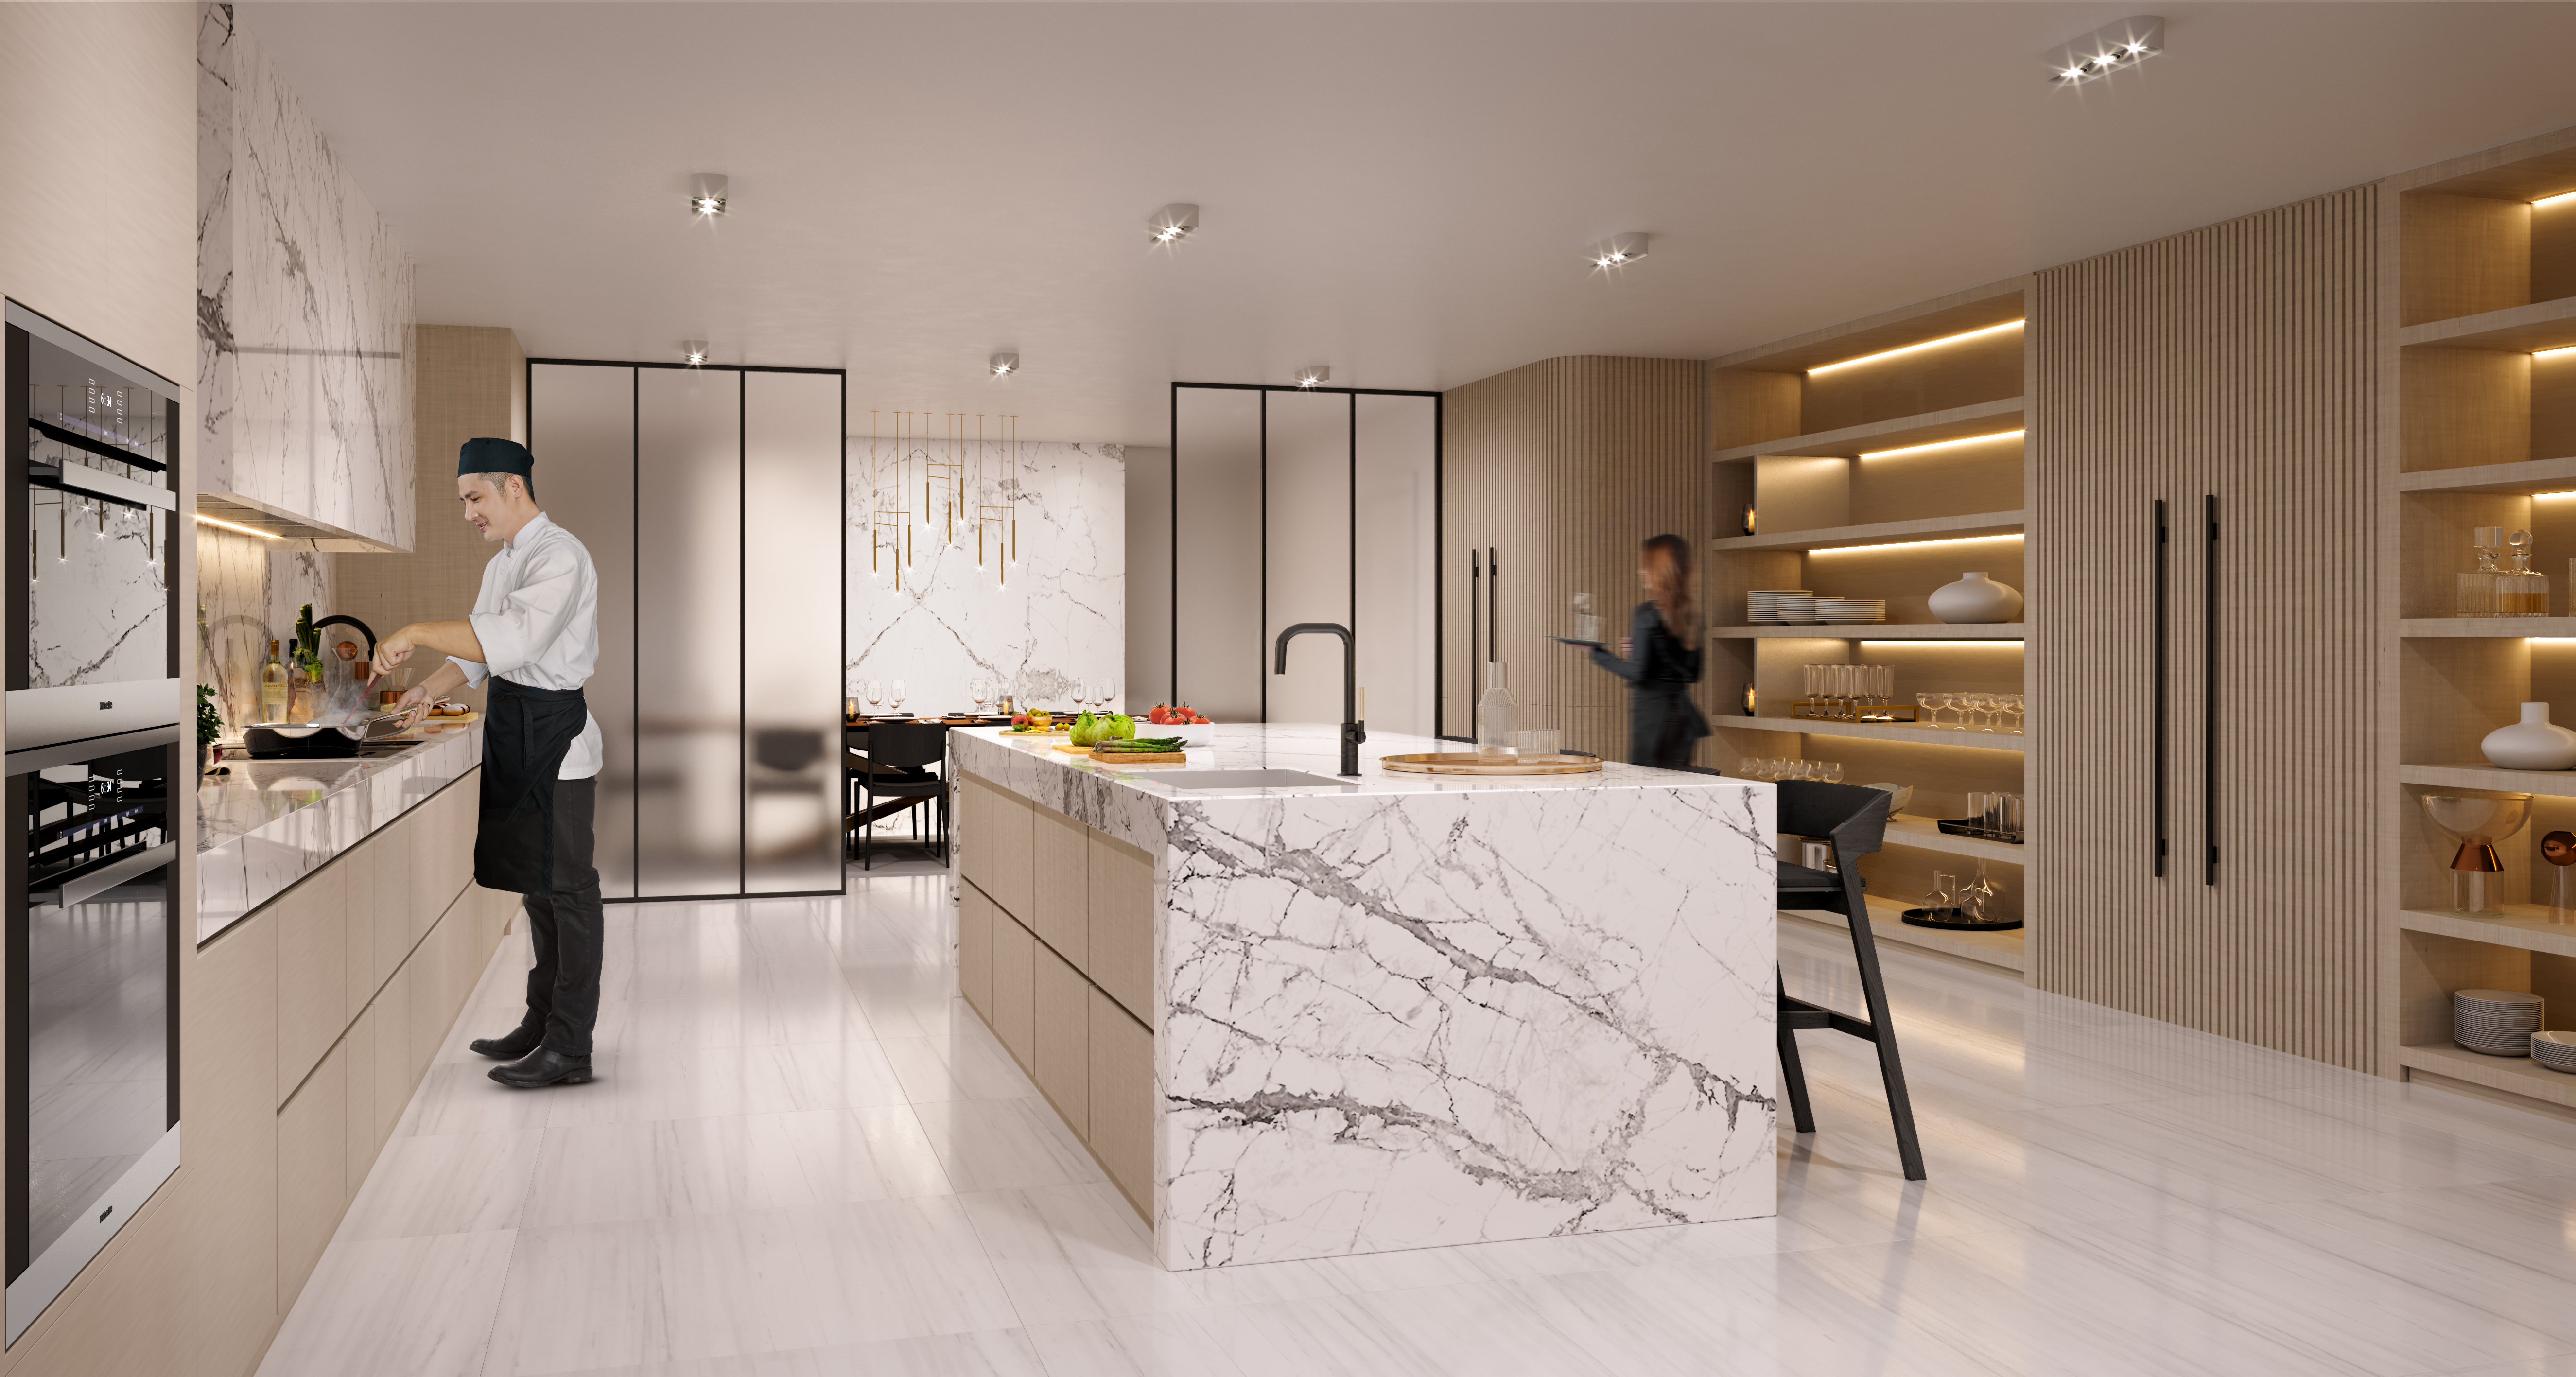 321 Catering Kitchen | Pre Construction Condos Investment